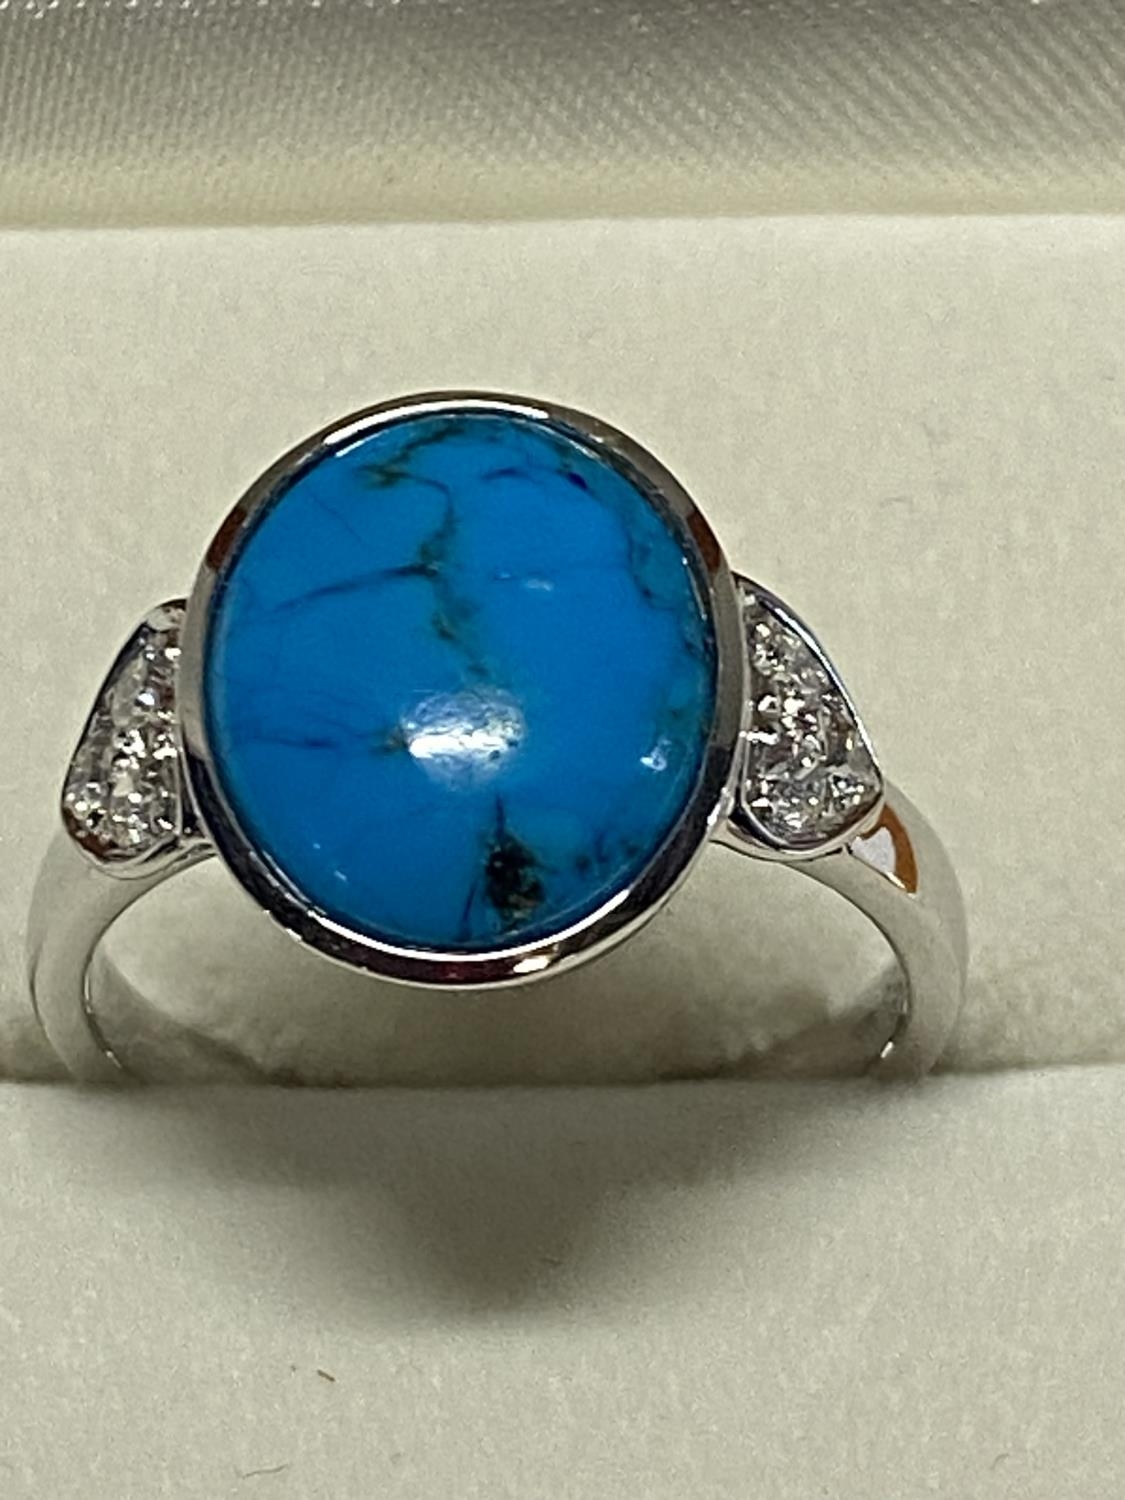 A hallmarked 18ct gold and turquoise ring. 3.93 grams total weight. Size M - Image 2 of 4